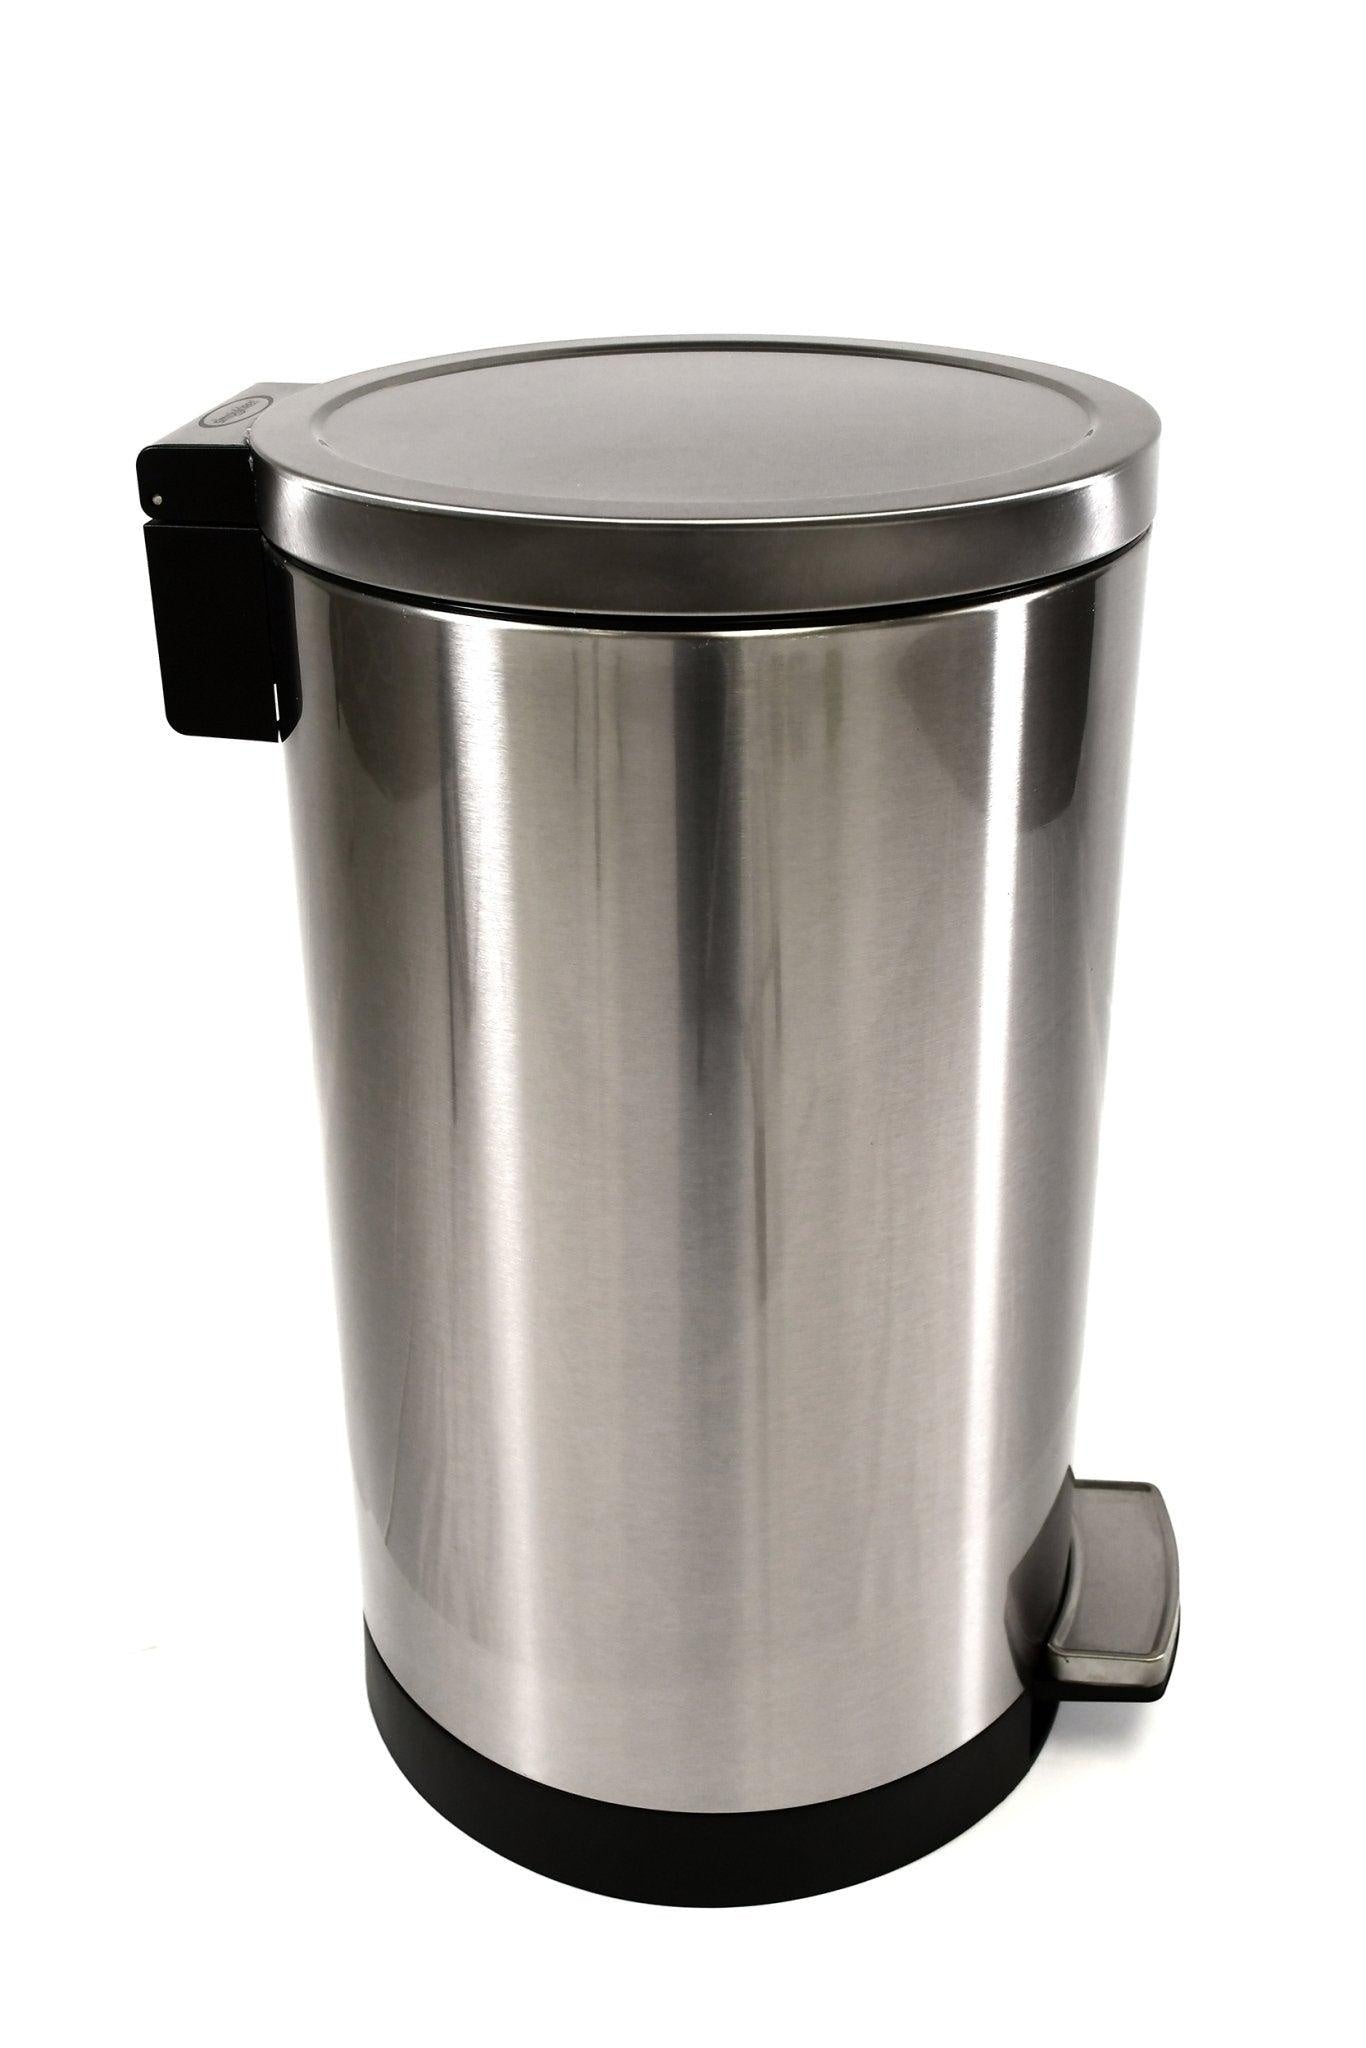 SIMPLYKLEEN Kleen-Fit 7.9-Gallon 30 Liter Round Stainless Steel Trash Can  with Lid